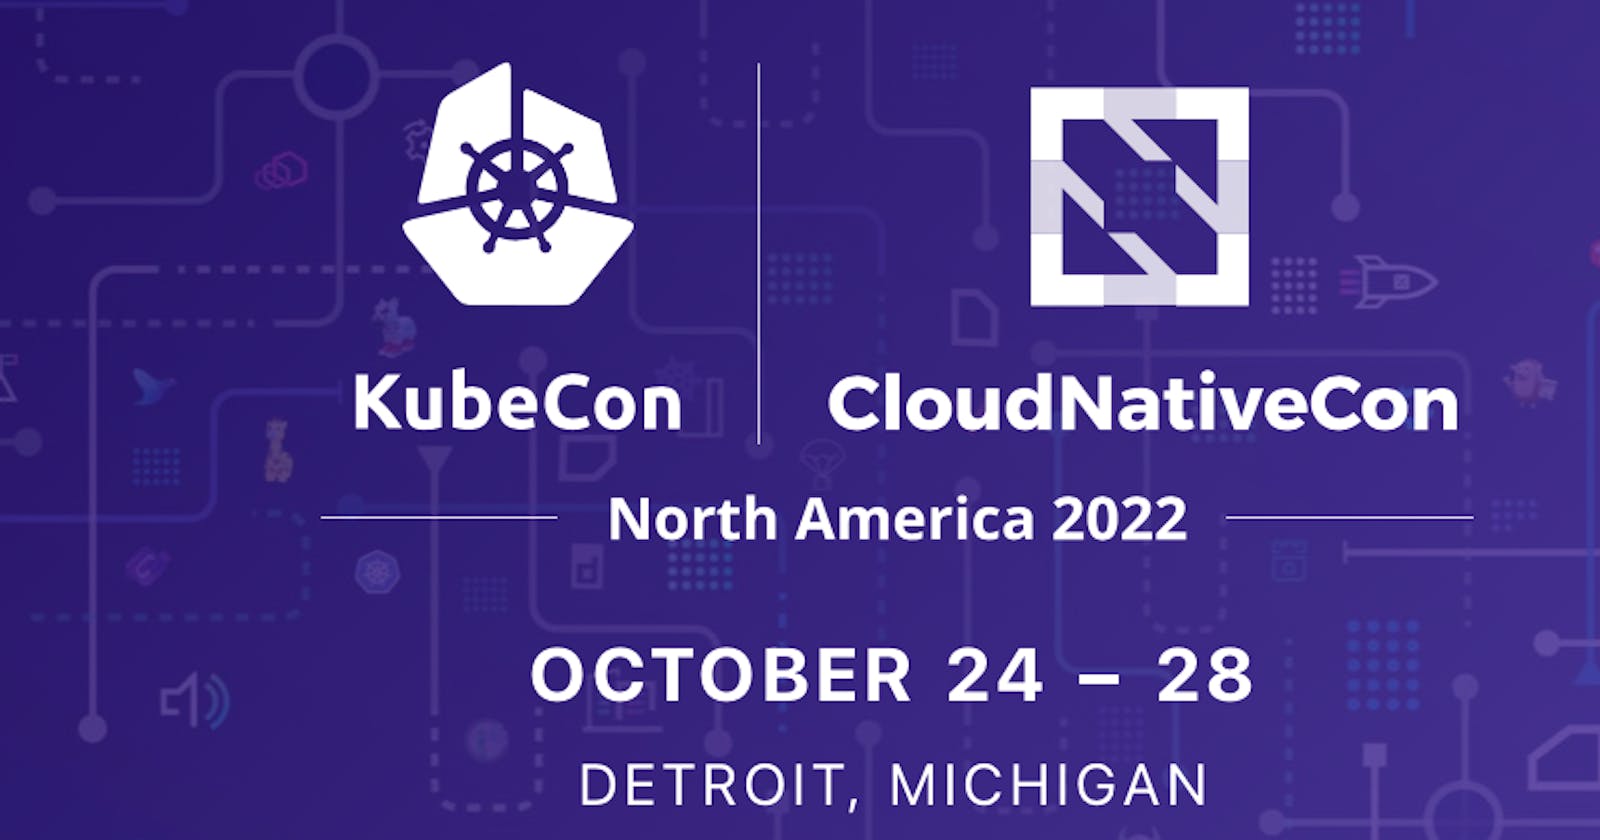 So, That's what happened at Kubecon CloudNativeCon 2022 North America.